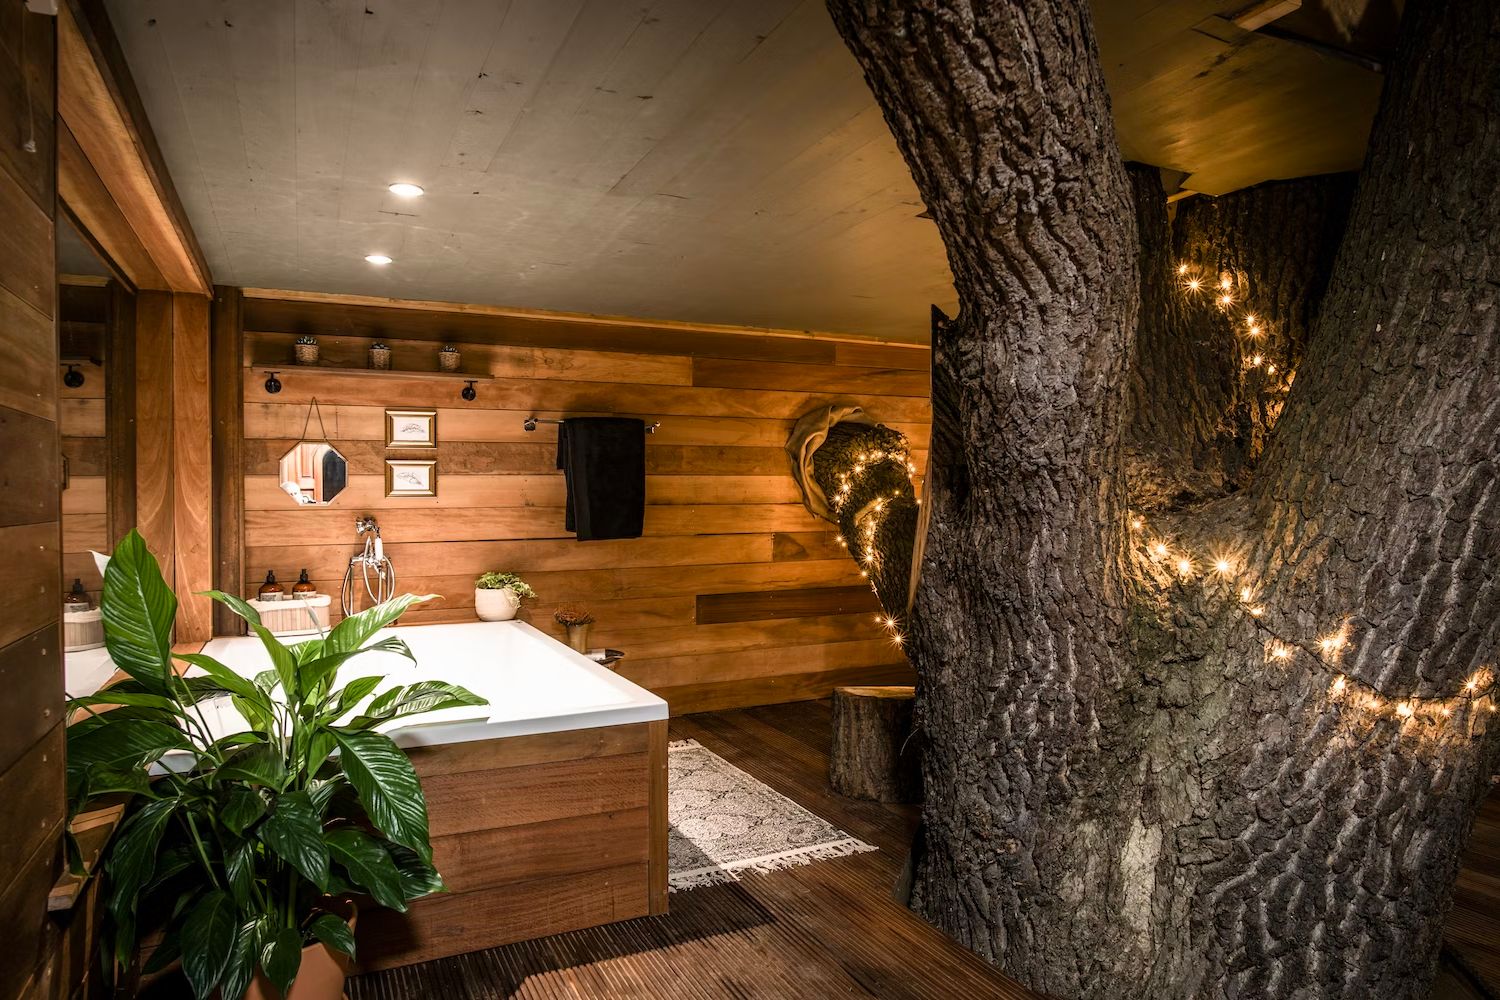 Treehouse bathroom with tree with fairy lights growing through it - The Old Oak Treehouse, Coleman’s Farm, Essex, England